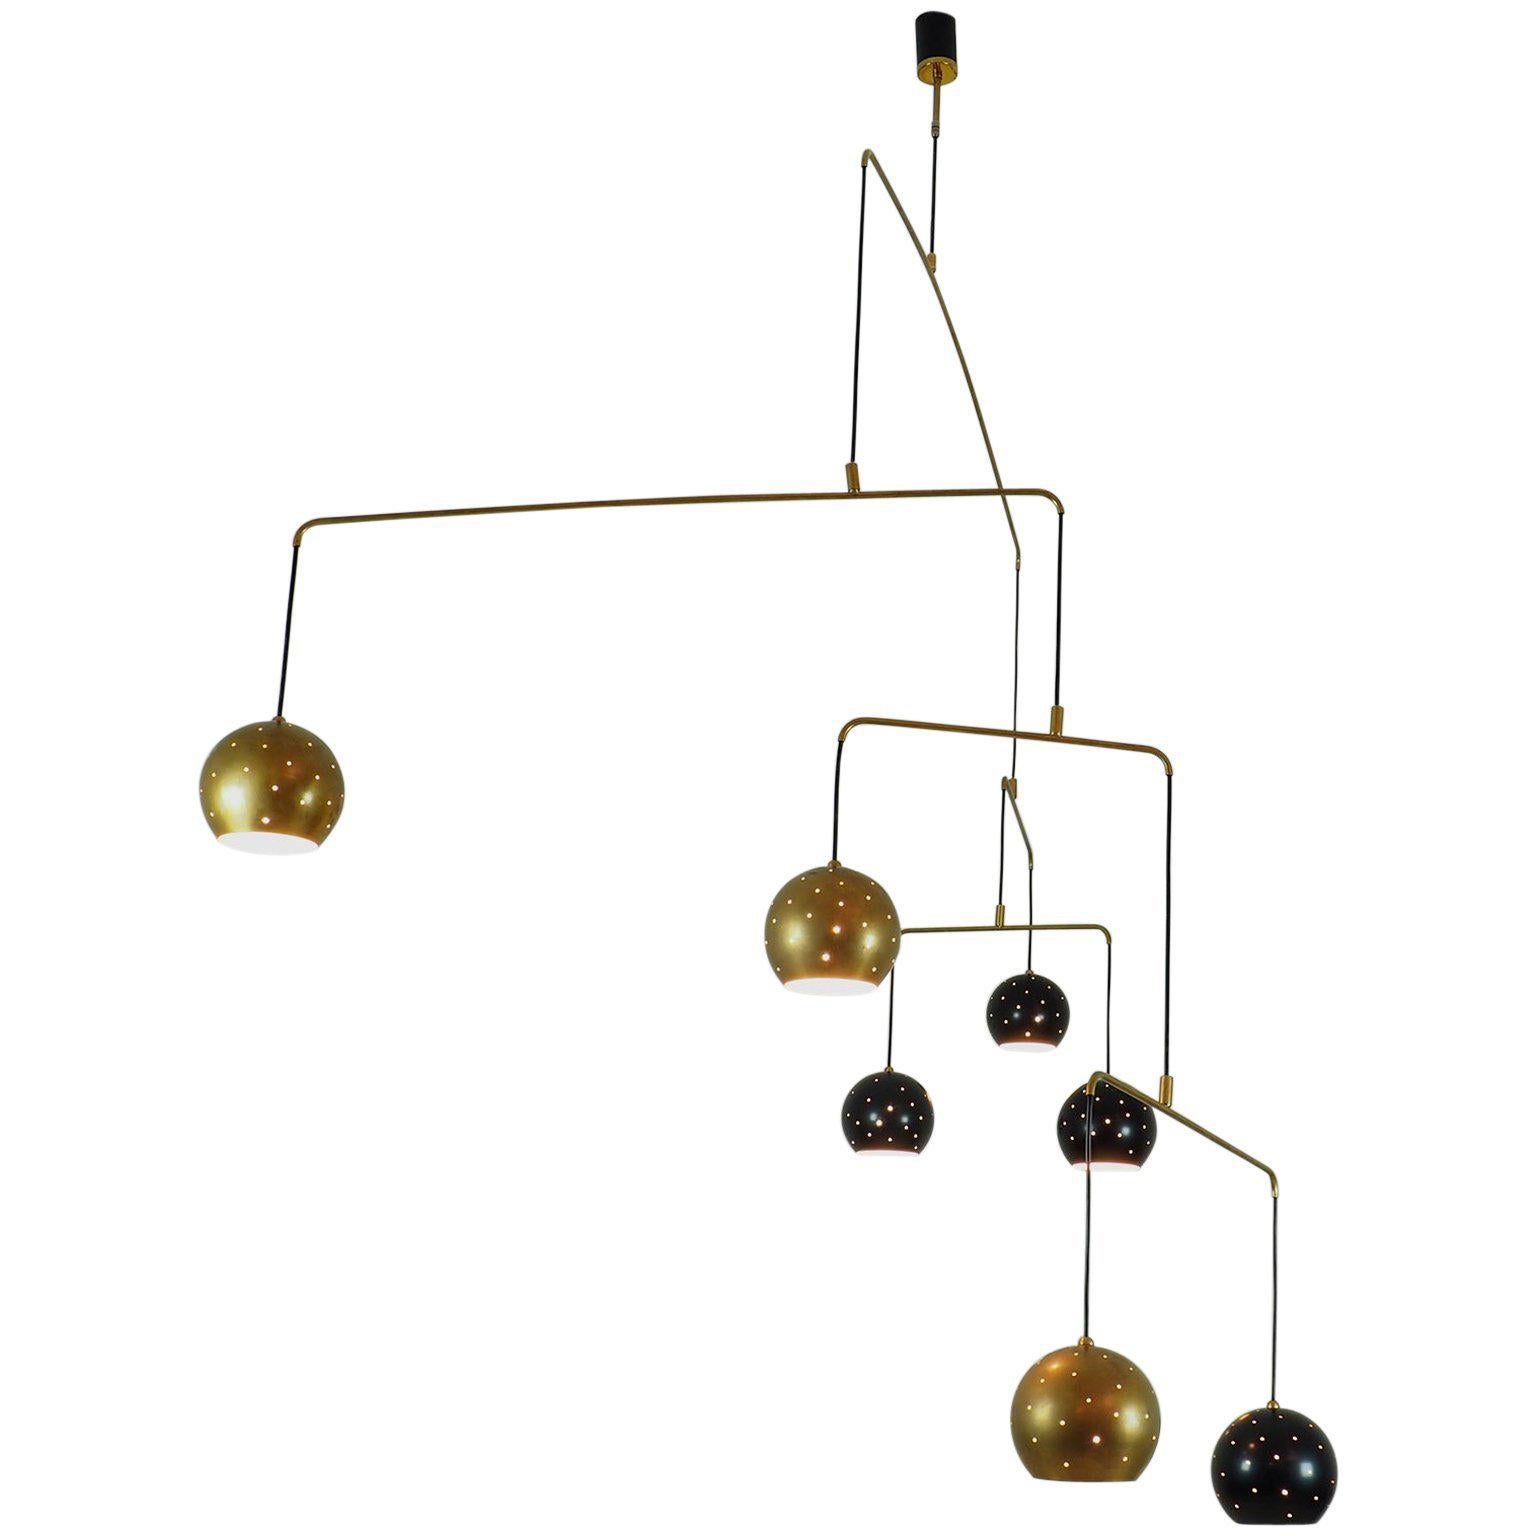 Original Italian brass mobile chandelier manufactured in a very small handcraft production in Milano, 20th century
Large, magic and poetical mobile chandelier with brass and black suspending spheres; it can moves with the flow of air.
Wholly in